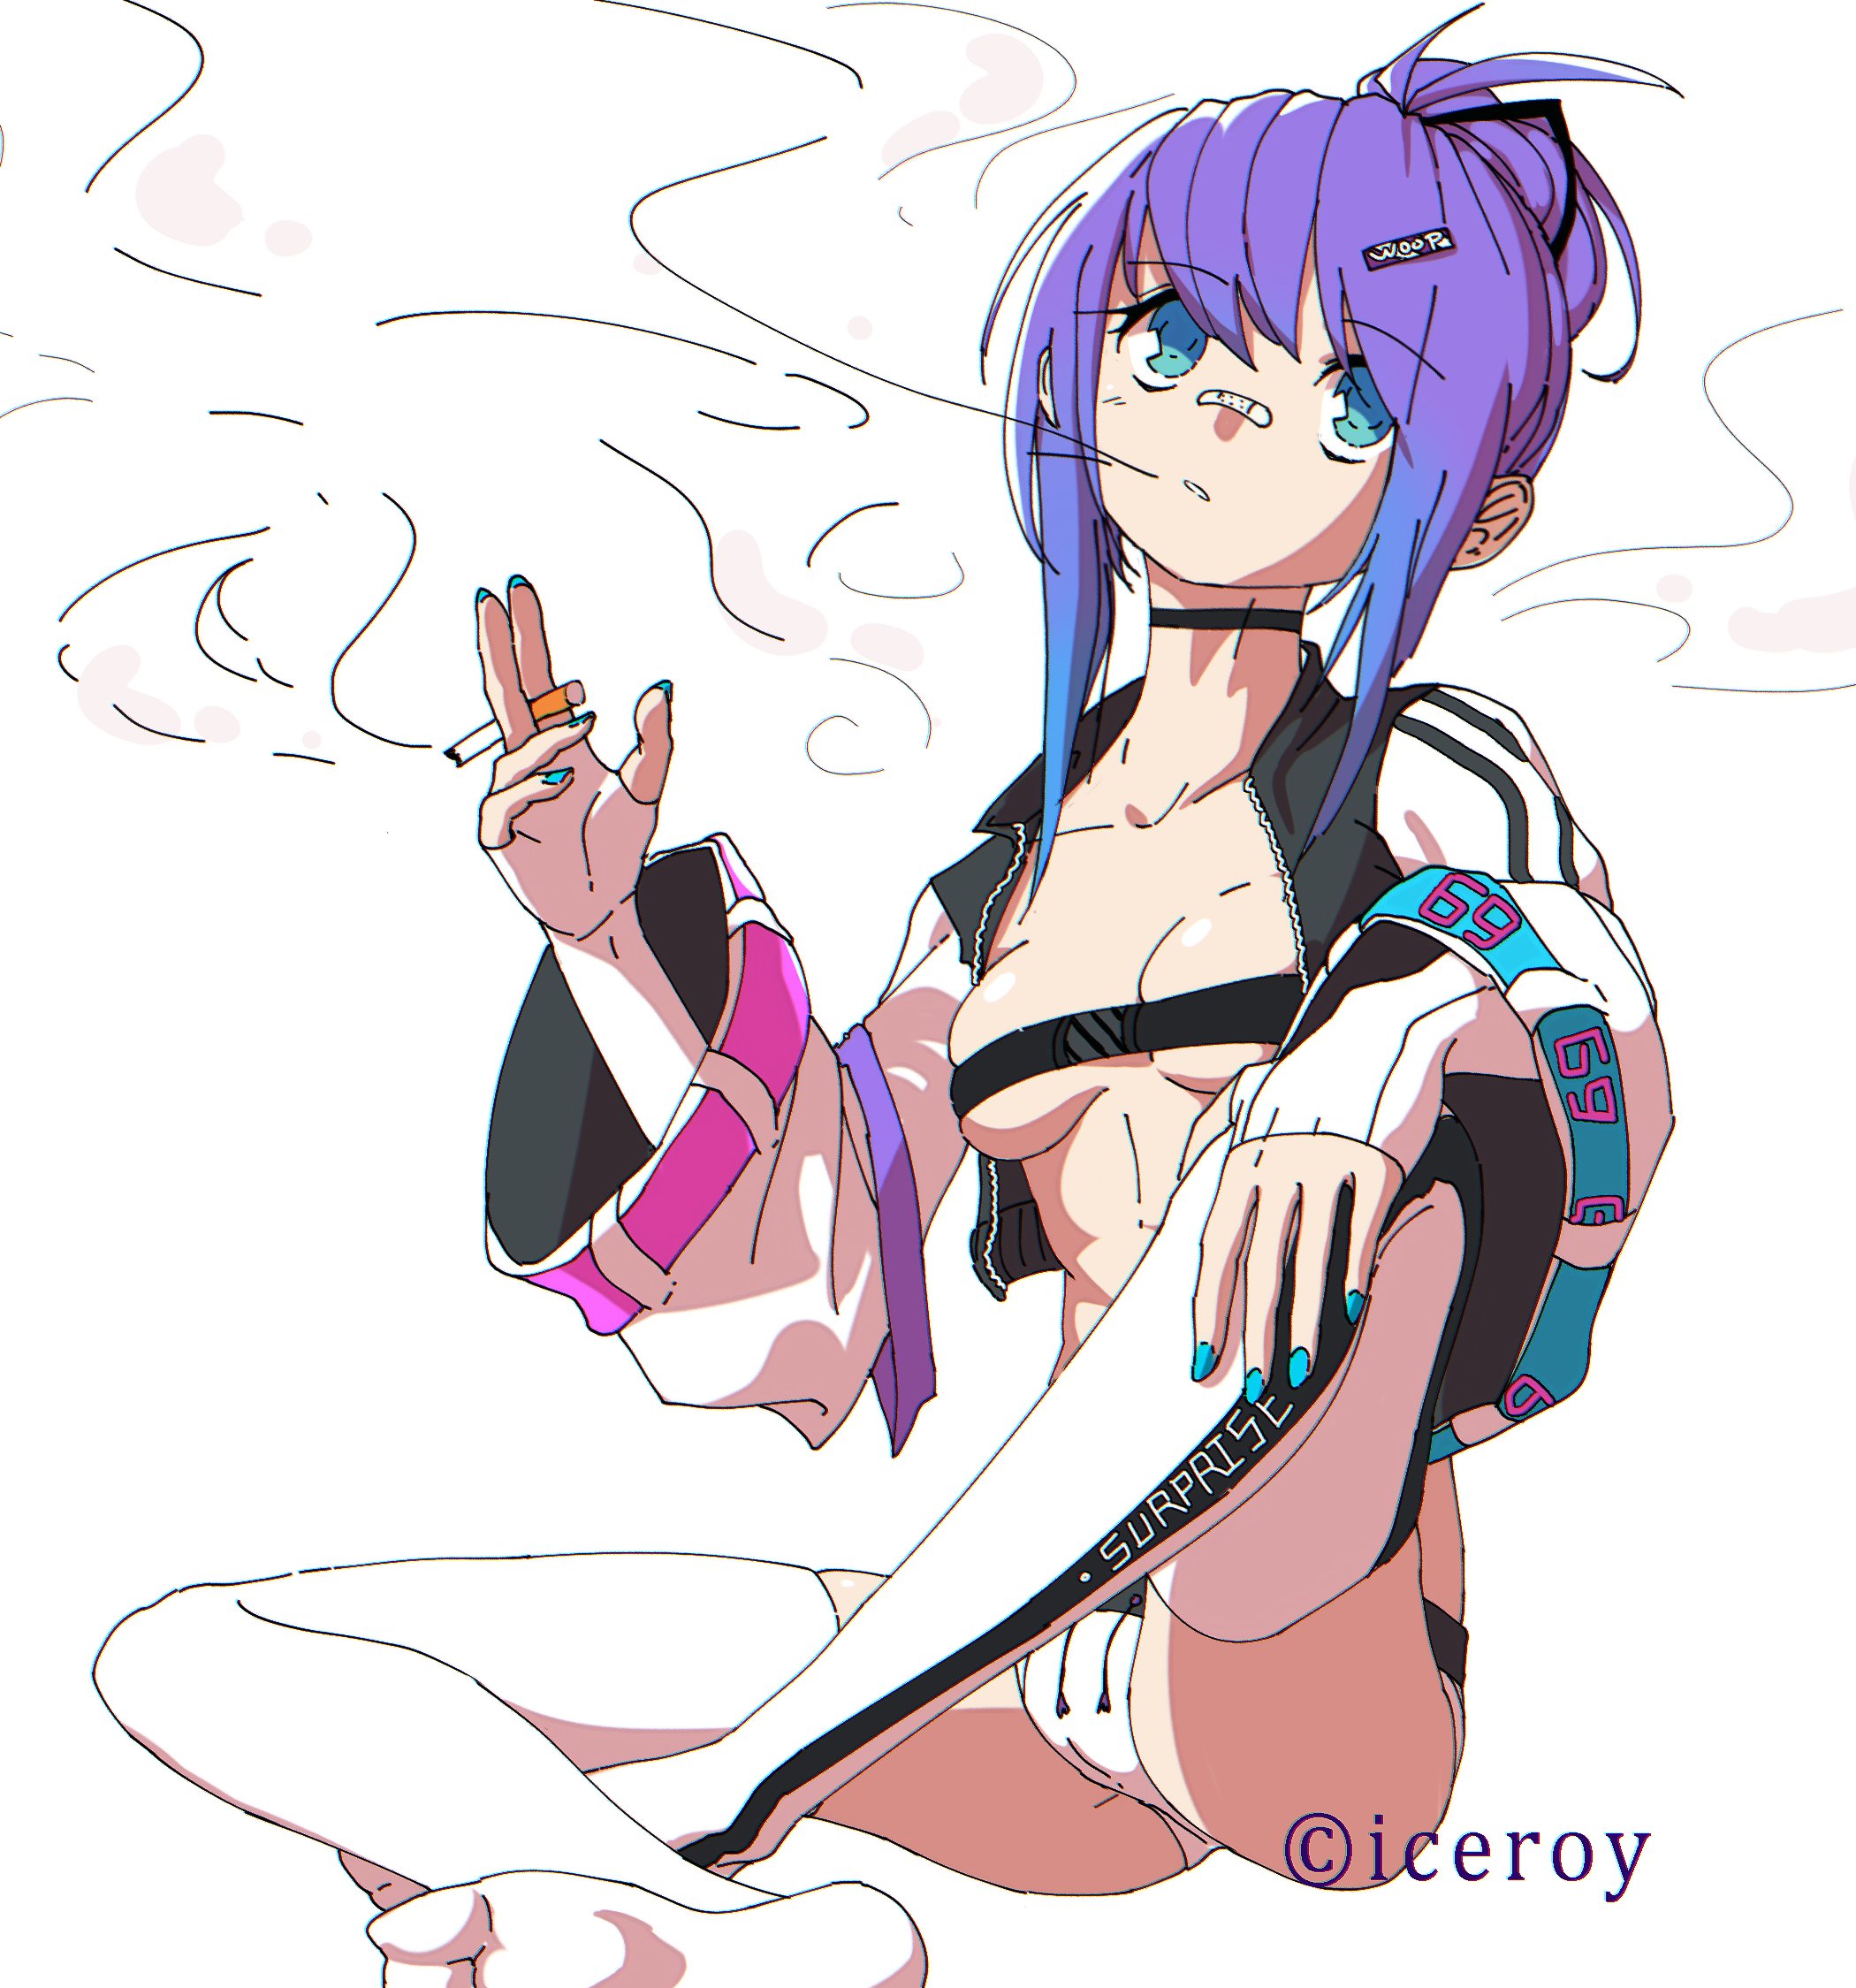 Anime Camgirl Projekt Melody Rabidly Desired Even in Fanart.